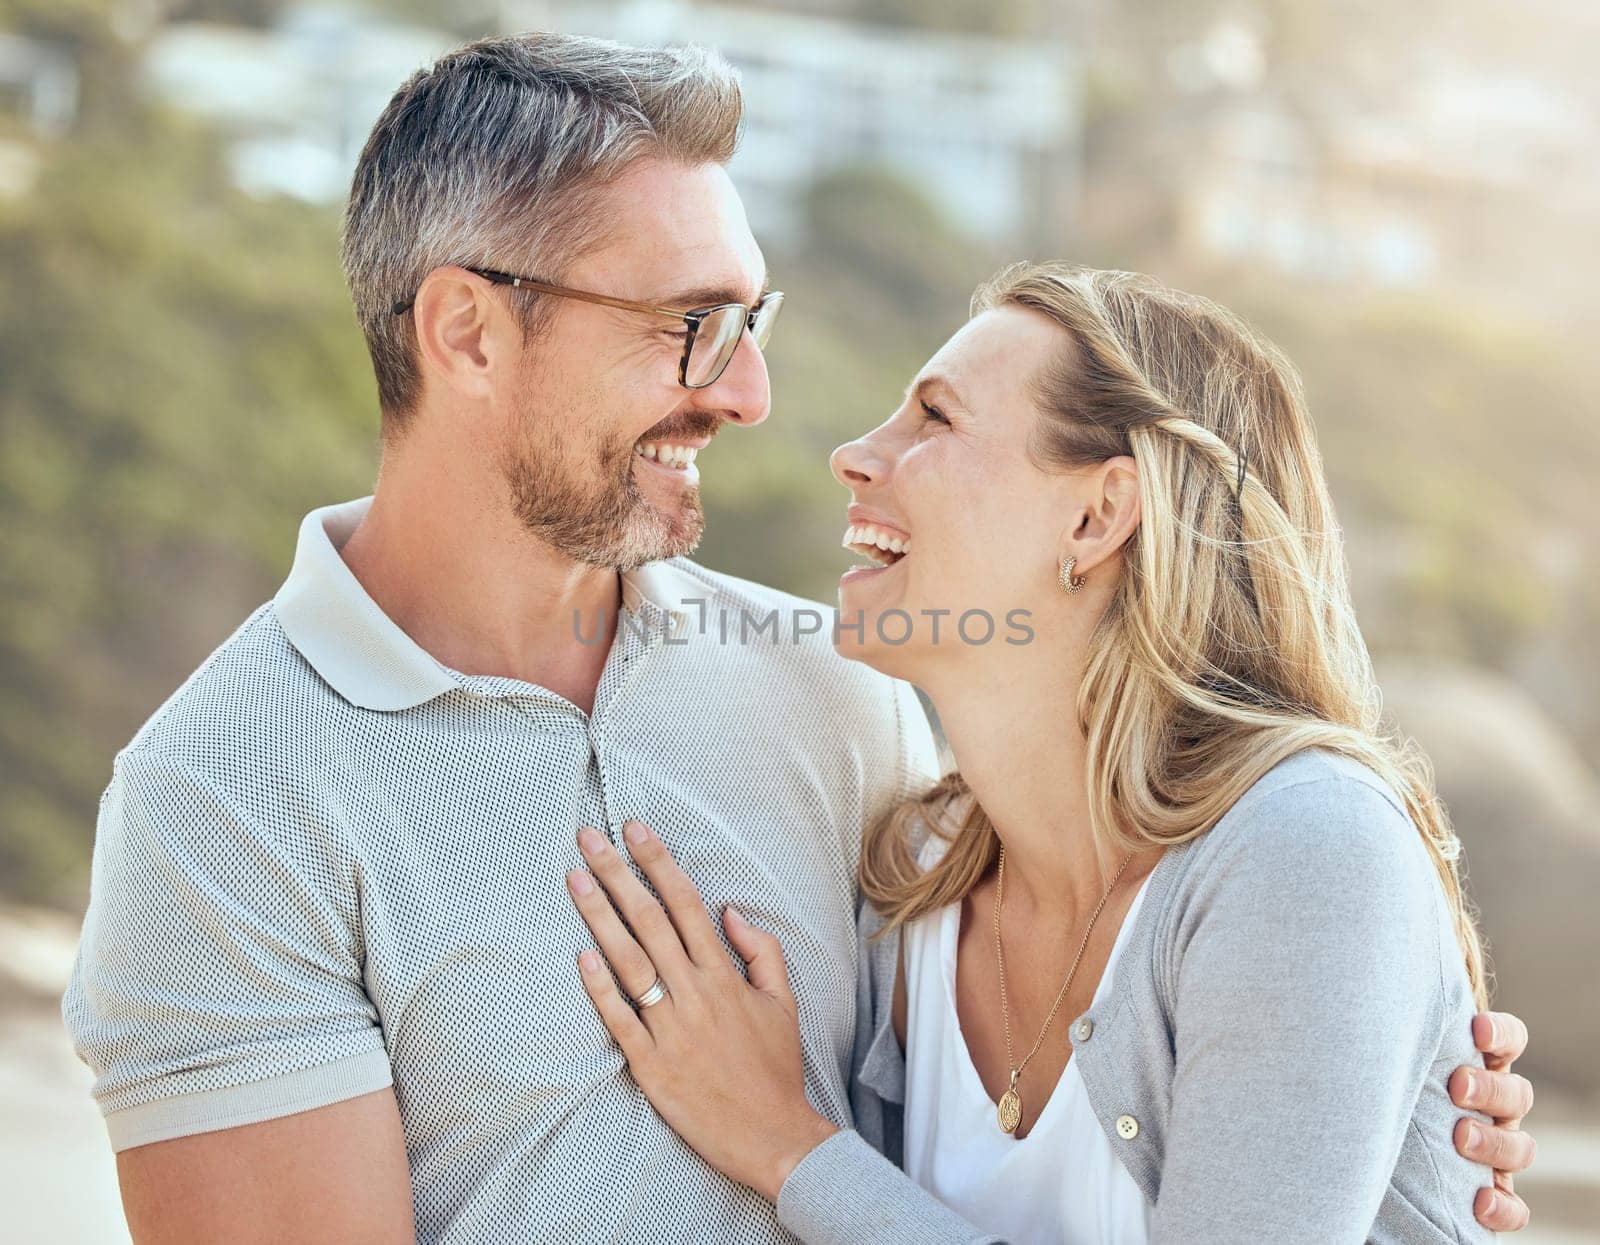 Happy, smile and love with couple at beach for laughing, travel and summer vacation. Happiness, holiday and romance with man and woman hugging on seaside date for bonding, affectionate and care.